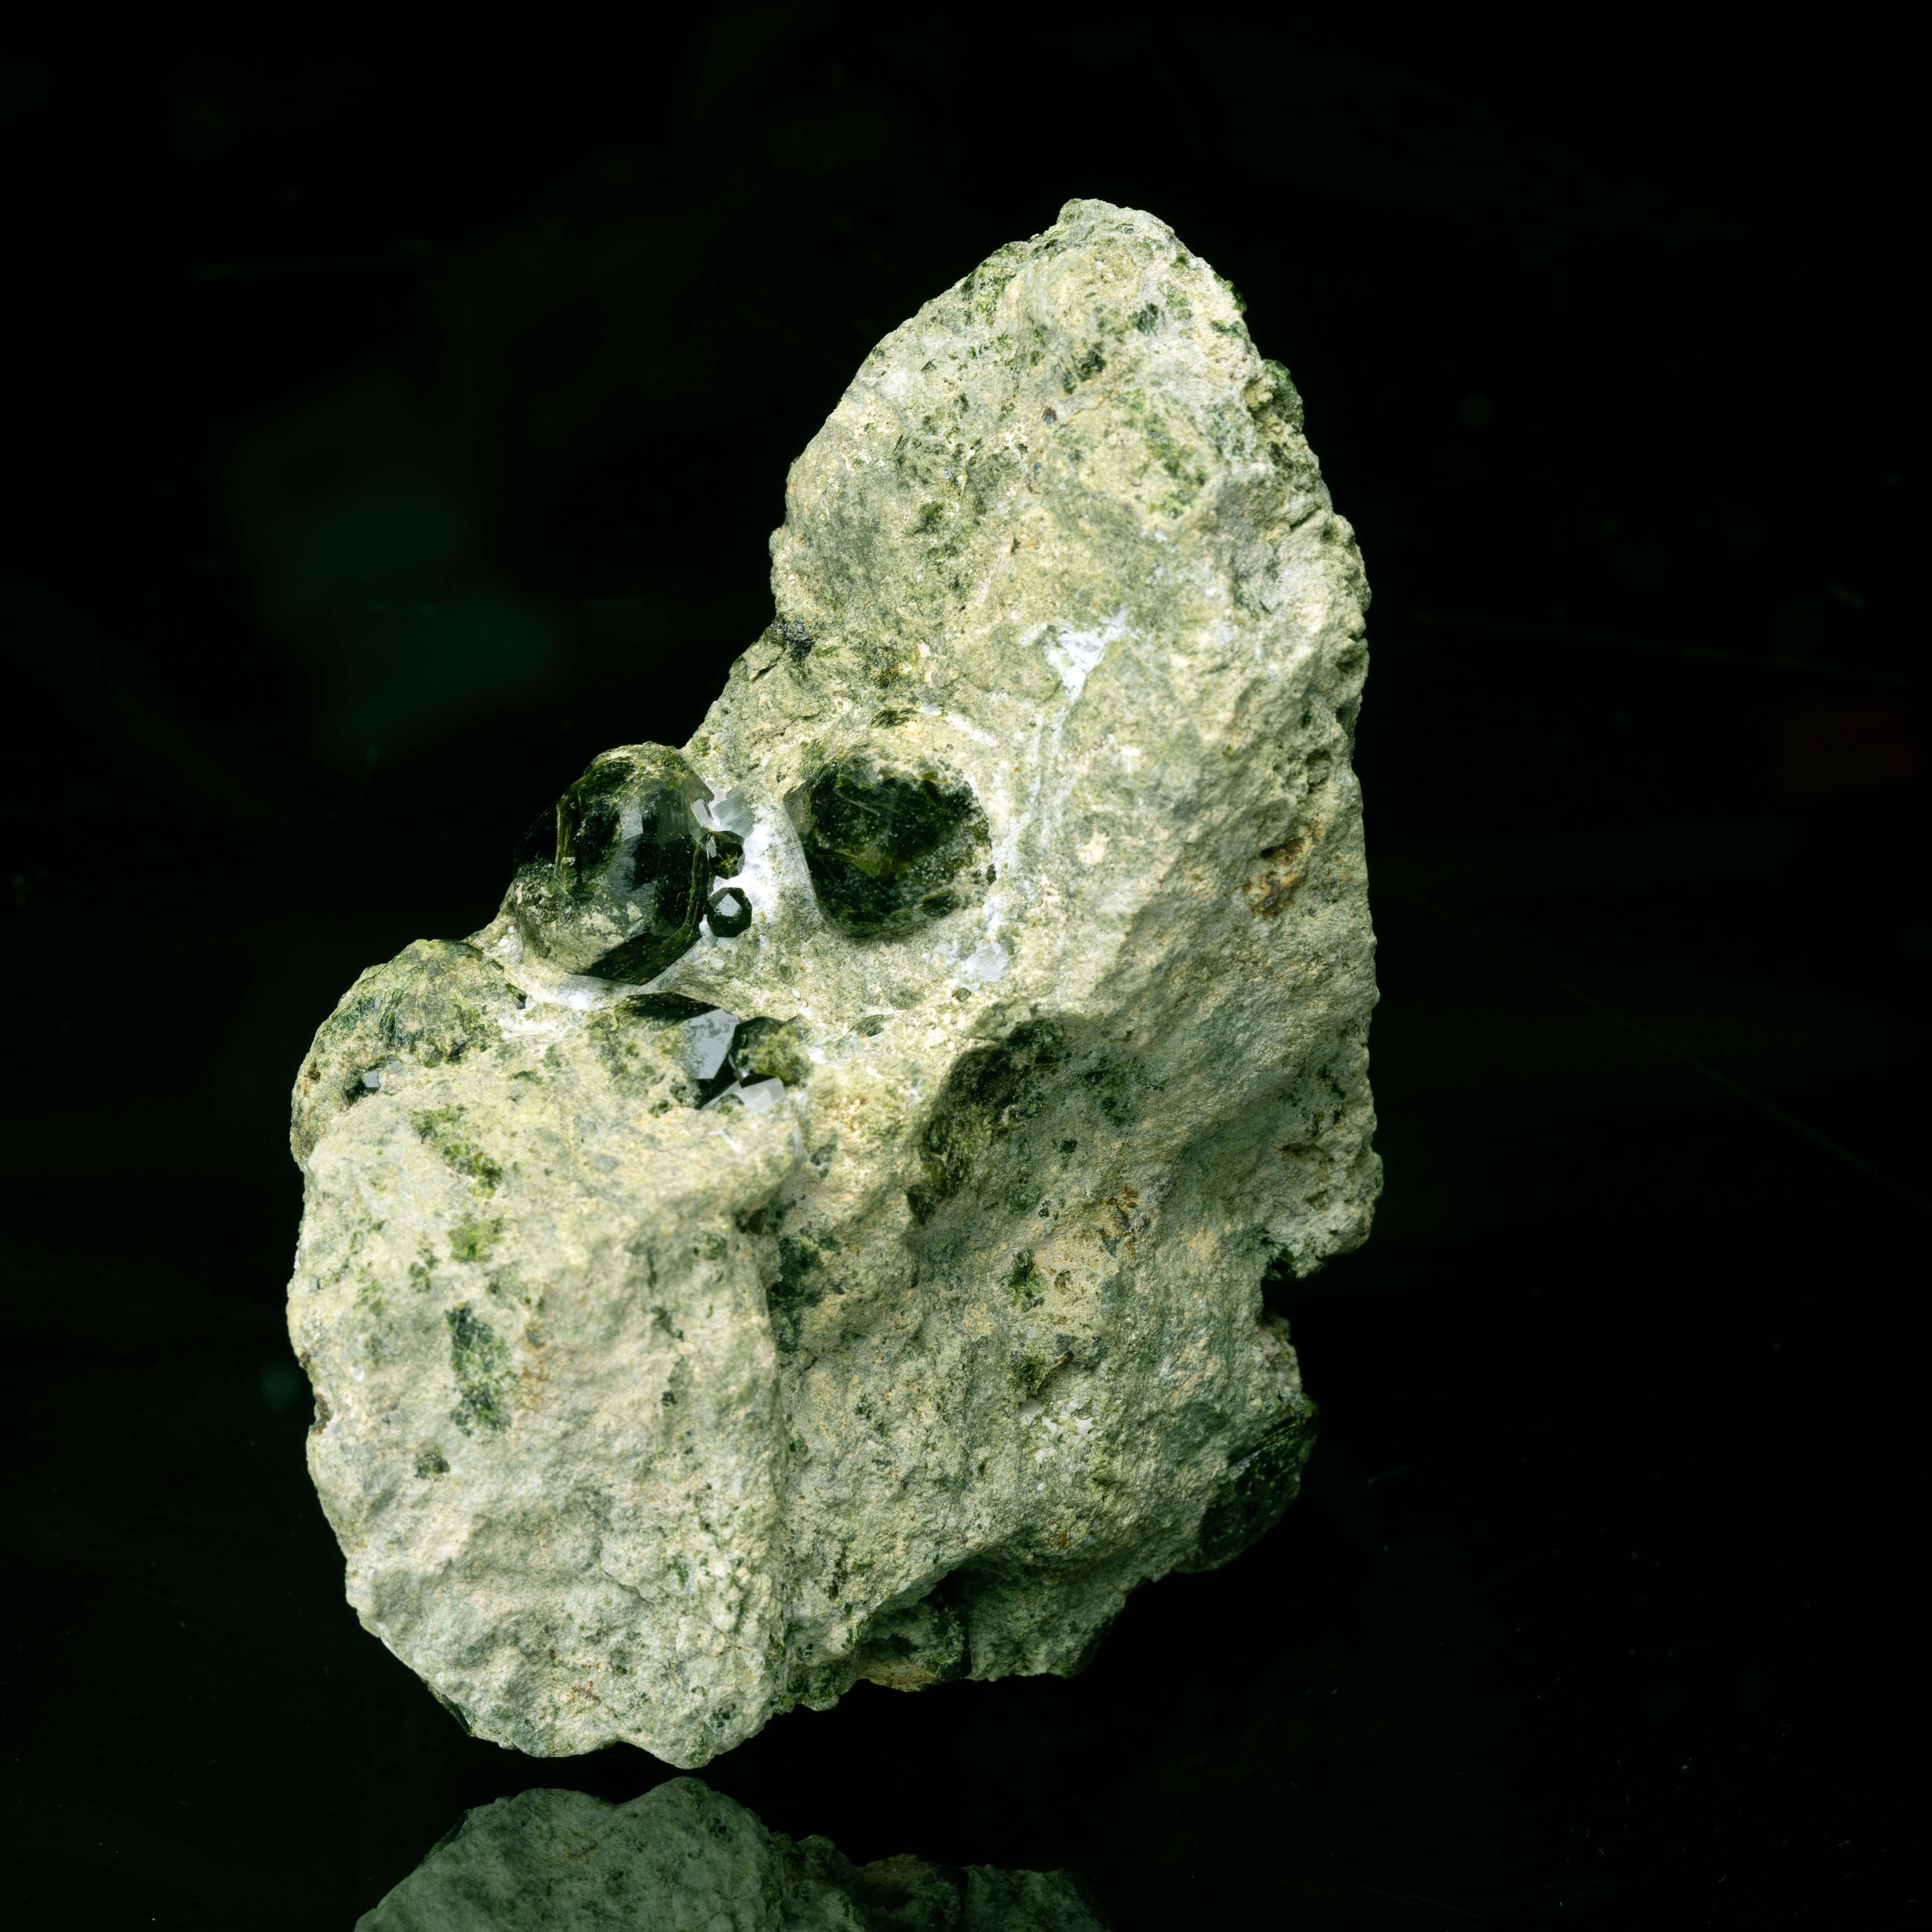 This show-stopping specimen features multiple sizable, intact, deep green demantoid garnets in various states of submersion within a rocky green matrix. The flat, earthy moss tone of the matrix plays brilliantly against the luster and fire of the